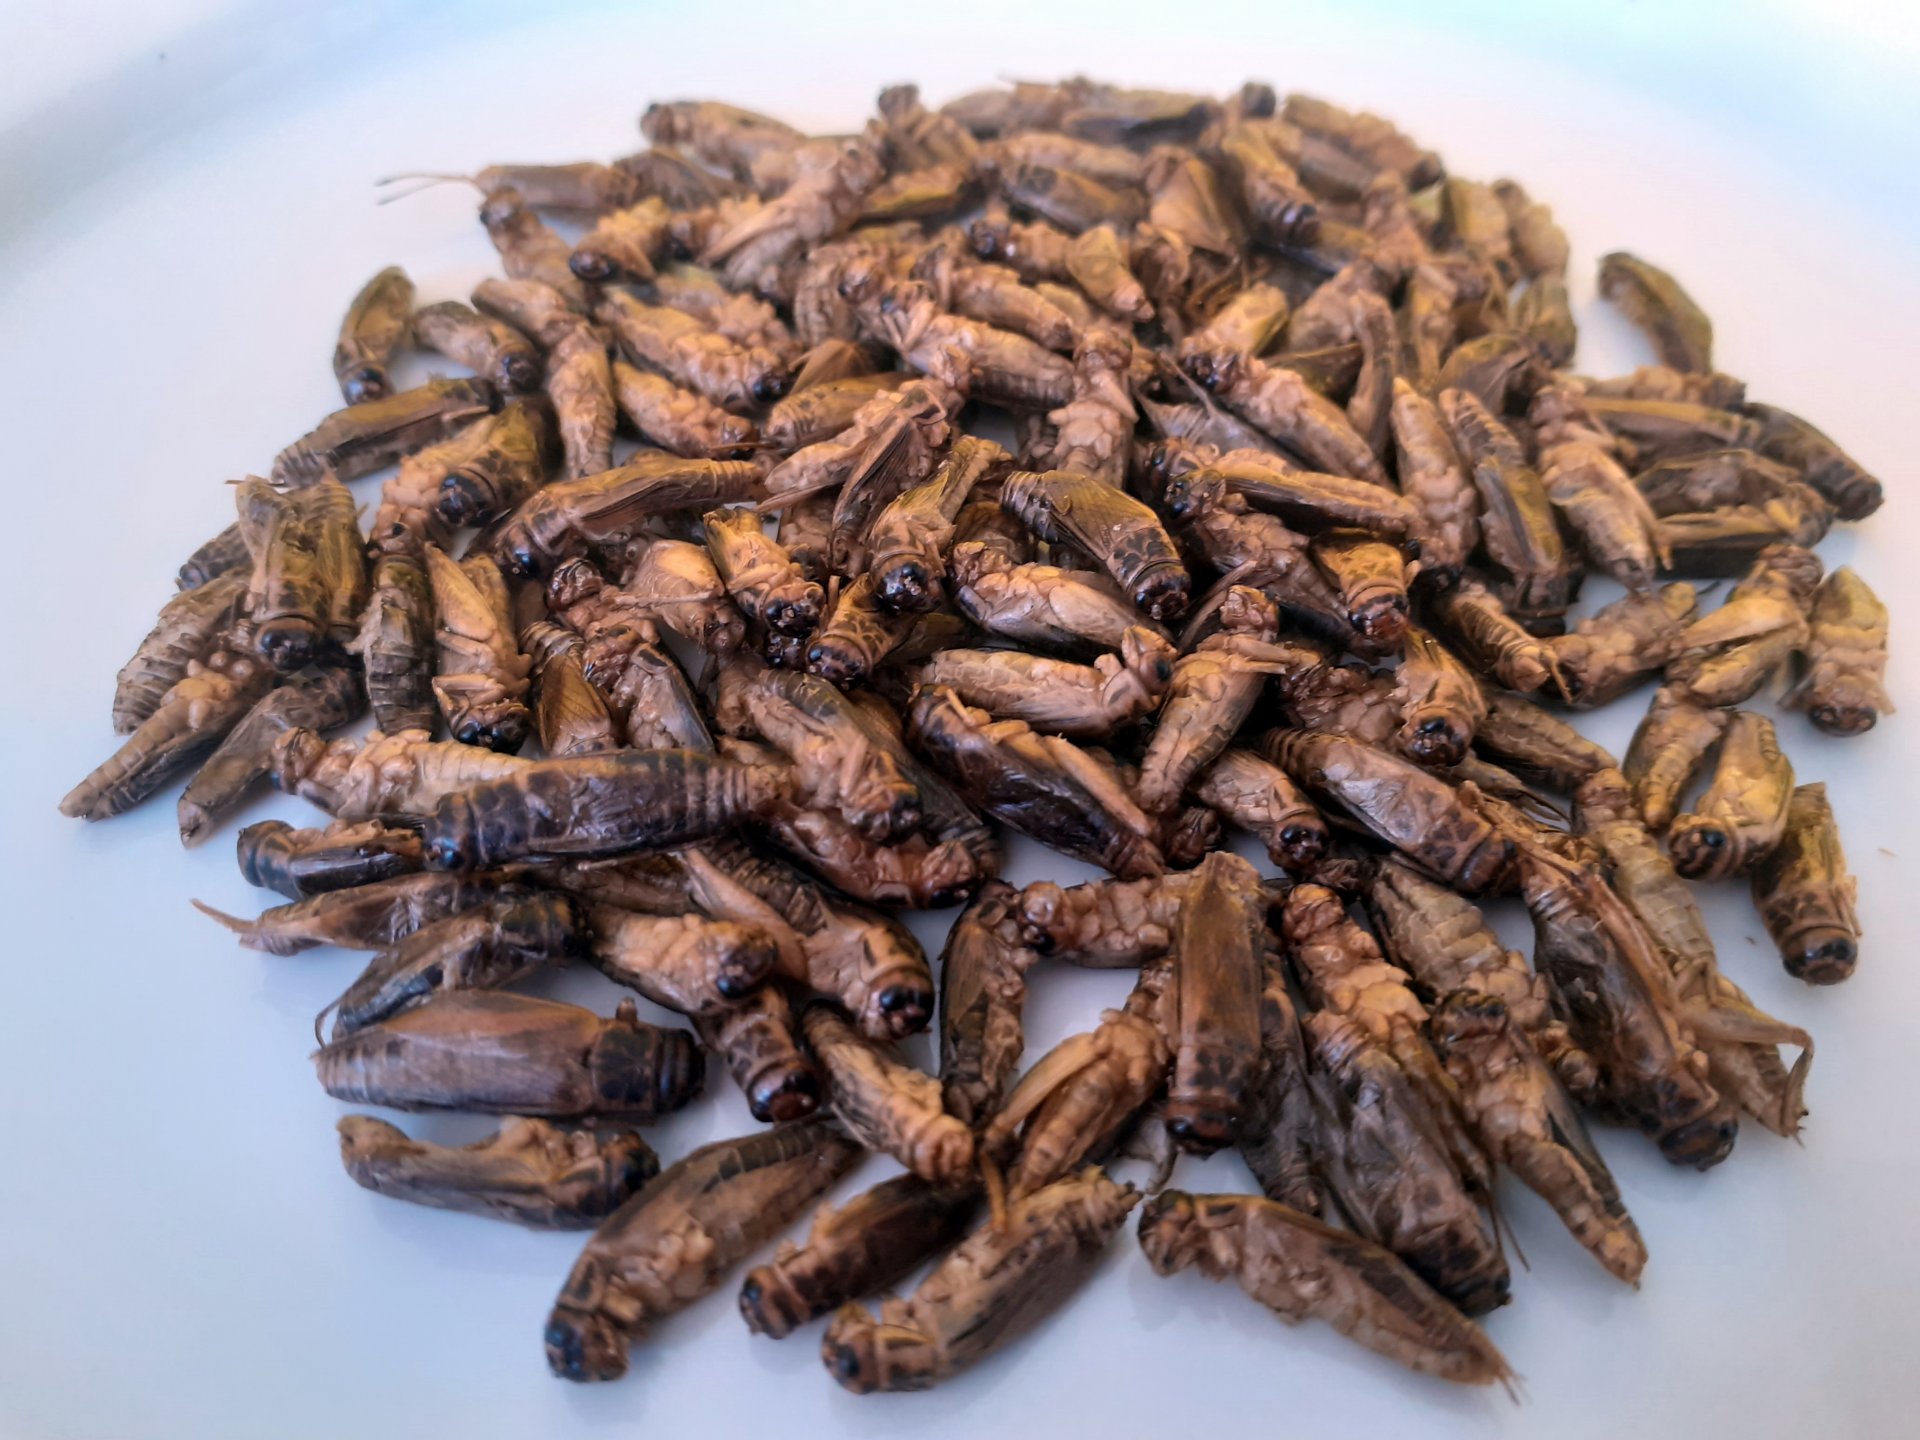 Food safety aspects of edible insects outlined in new publication